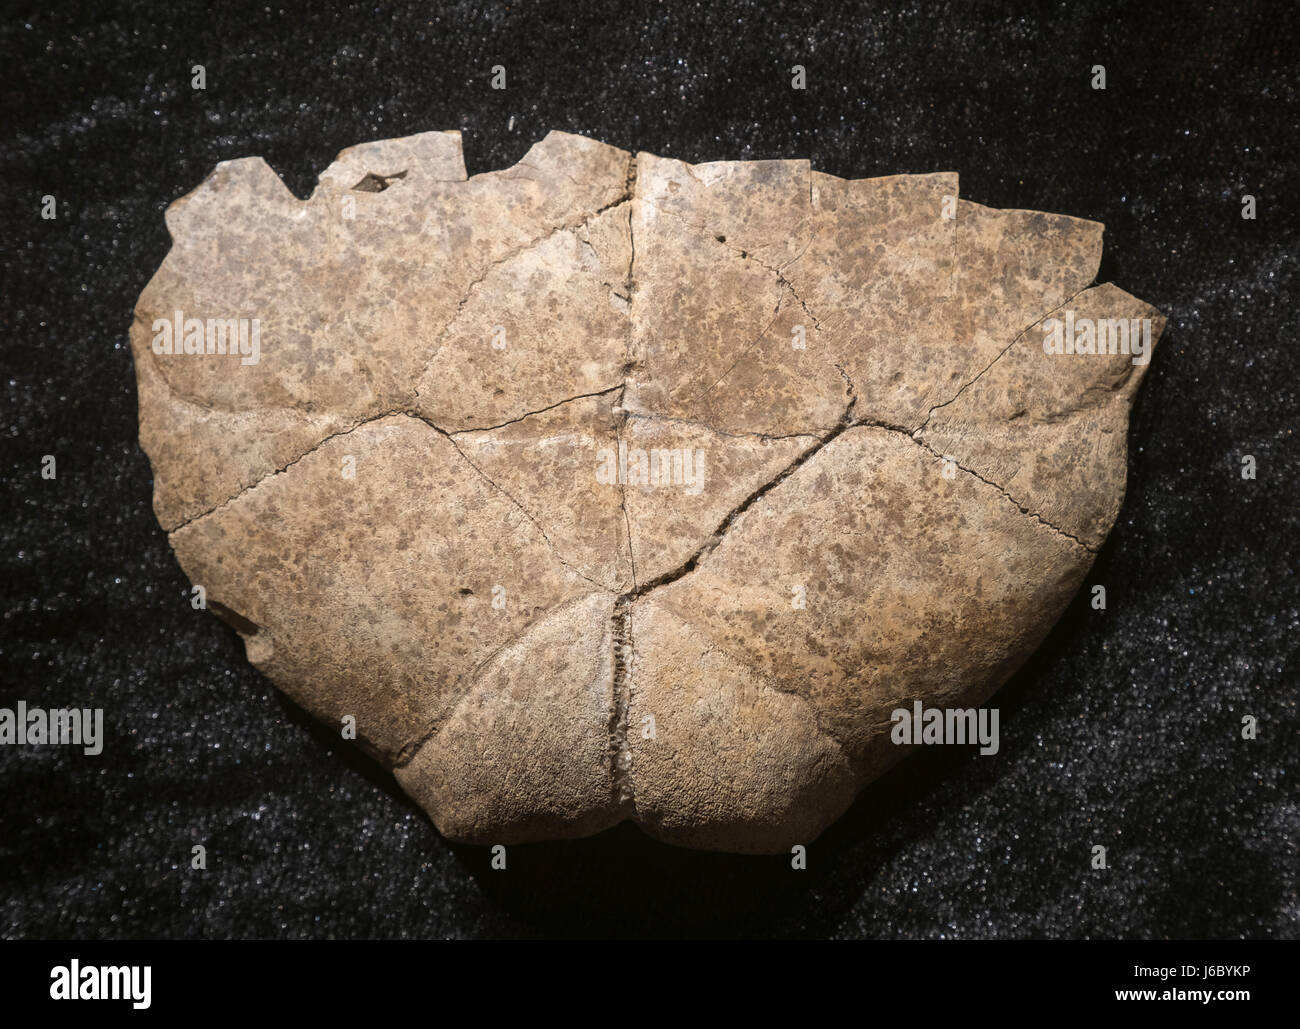 Oracle bone carved with characters. Late Shang Dynasty (13th century B.C.E - mid. 11th century B.C.E) Discovered in Yin relic in Anyang, Henan. Stock Photo